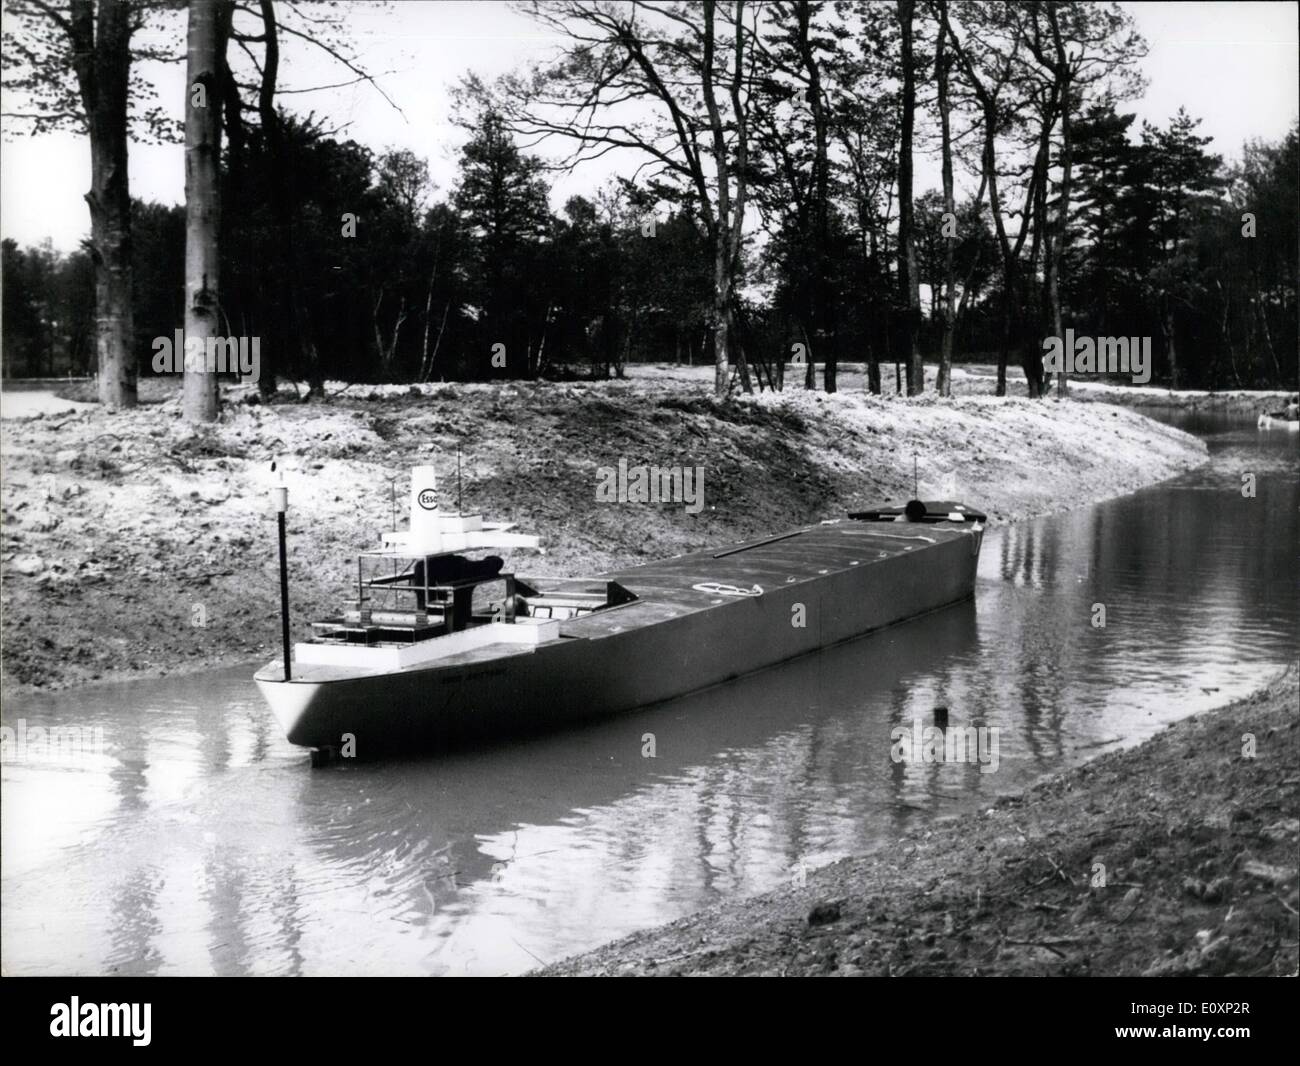 Jul. 07, 1967 - Small Scale Tankers To Train Captains: Under the Sponsorship of ESSO small scale tankers are being used for training captains and pilots in an artificial canal near Grenoble, Franc. Photo Shows A star board quarter view of the captain and helmsman on the ''ESSO Brittany' Stock Photo